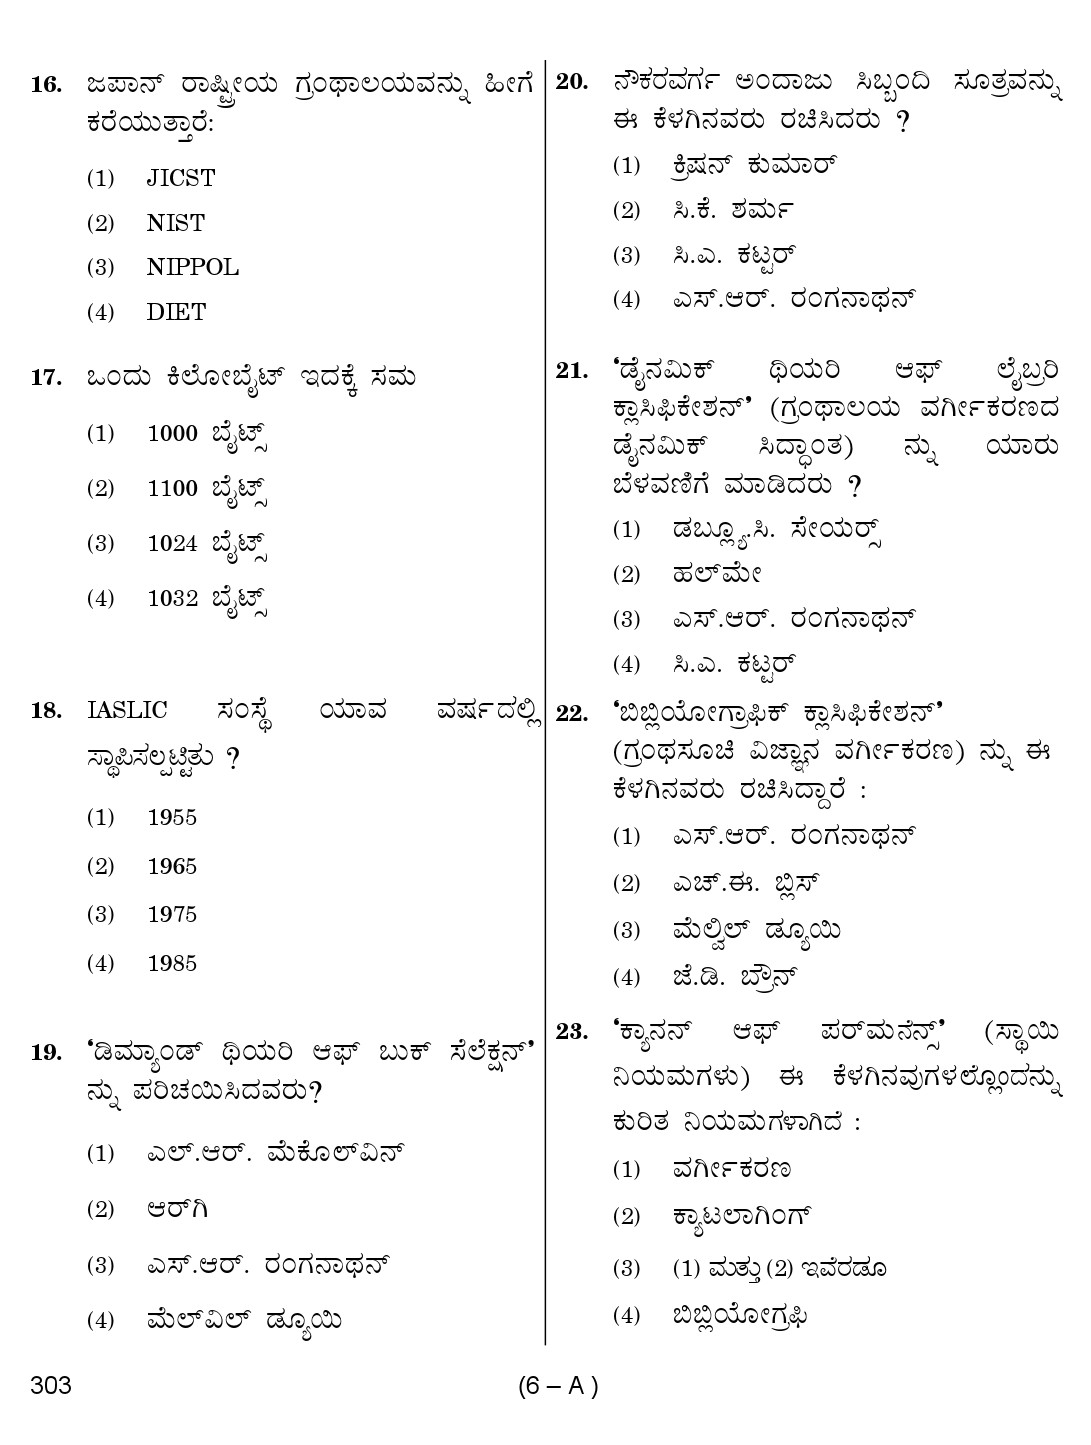 Karnataka PSC 303 Specific Paper II Librarian Exam Sample Question Paper 6